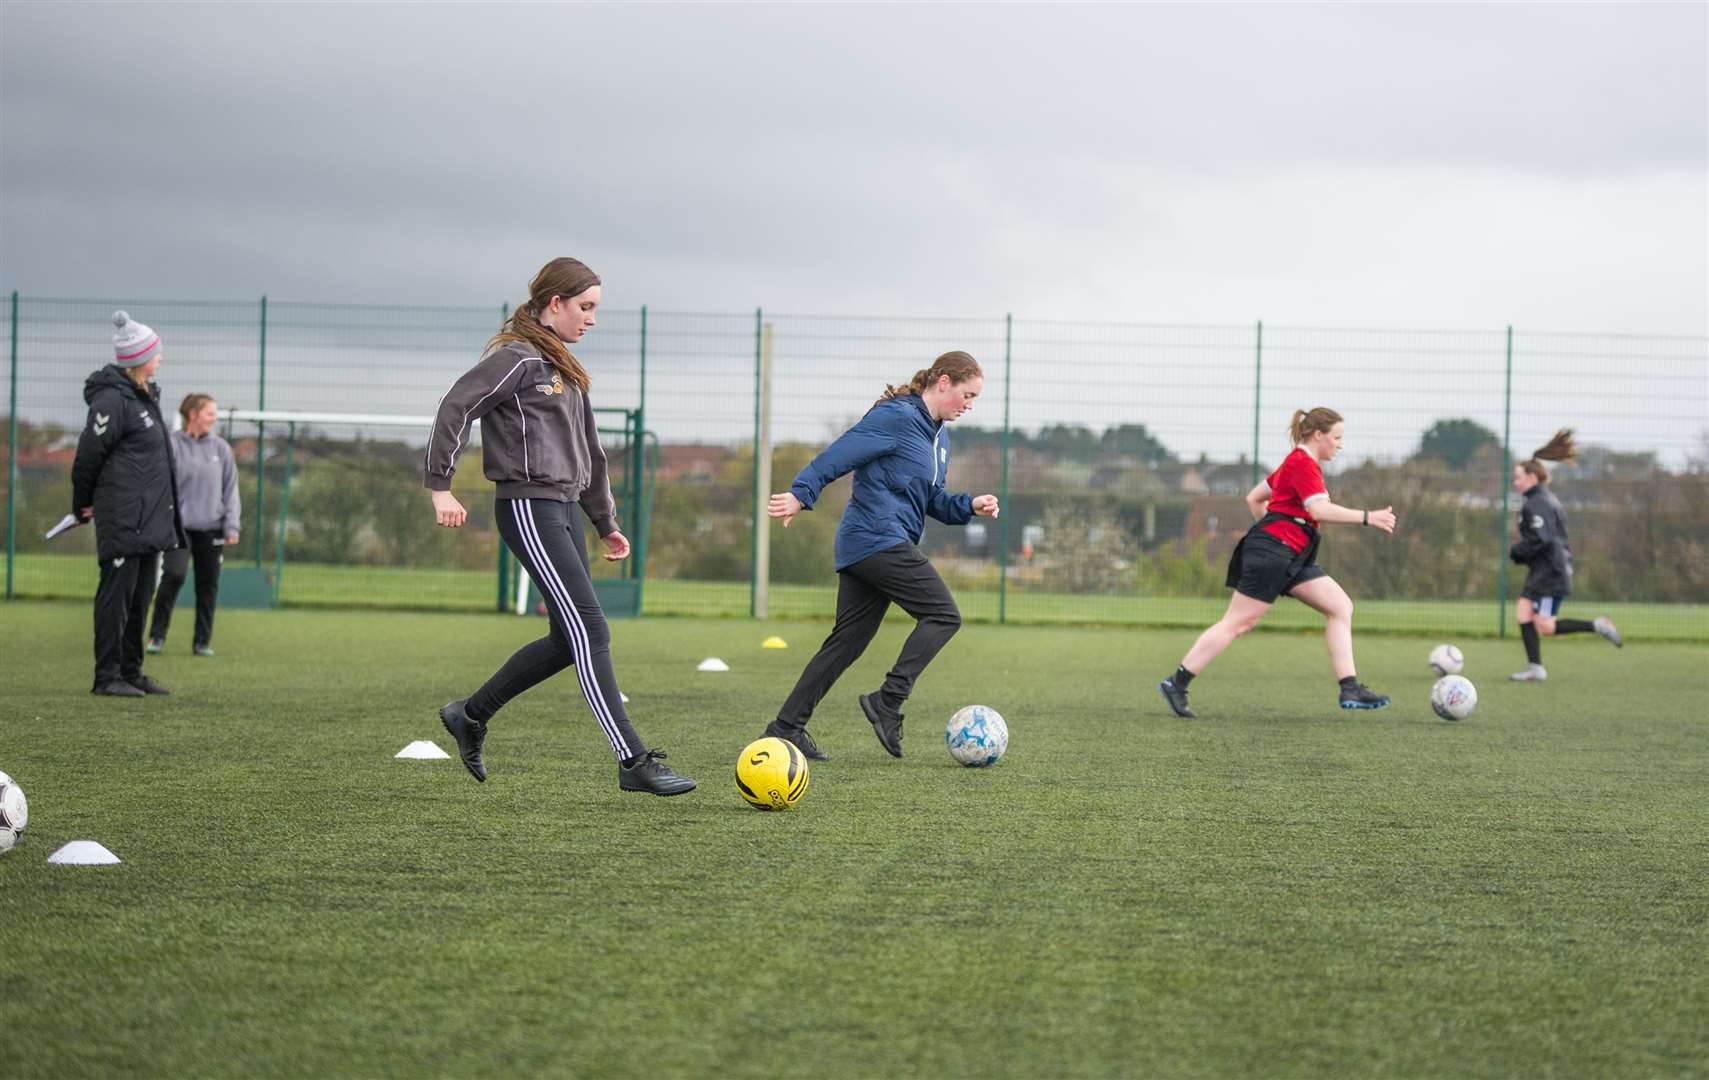 Getting back into training are (from front) Abigail Anderson, Moira Beadle, Rebecca McMillan and Millie Findlay, watched by manager Mel Smith and Laura Duncan. Picture: Becky Saunderson